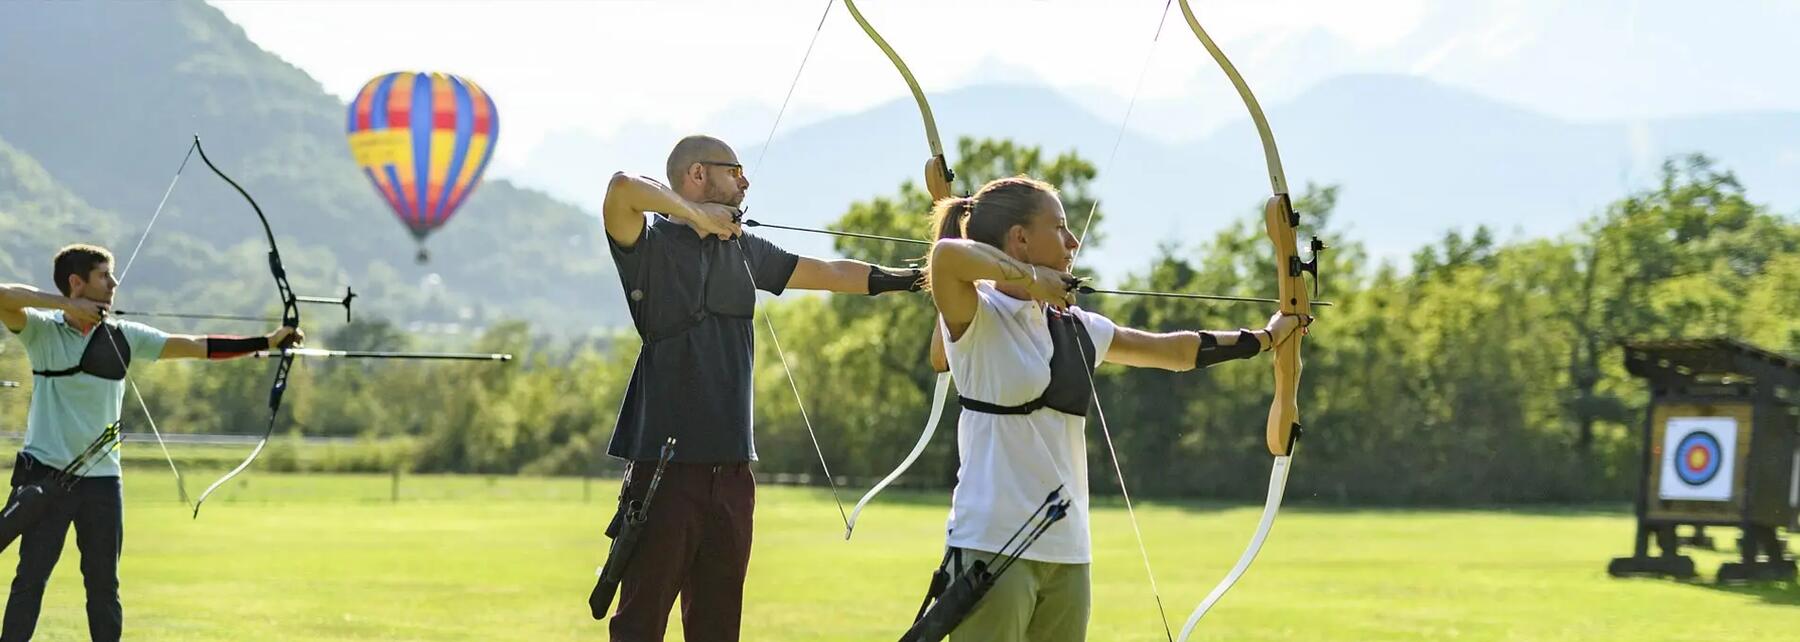 A woman and two men pointing their archery bows and arrows